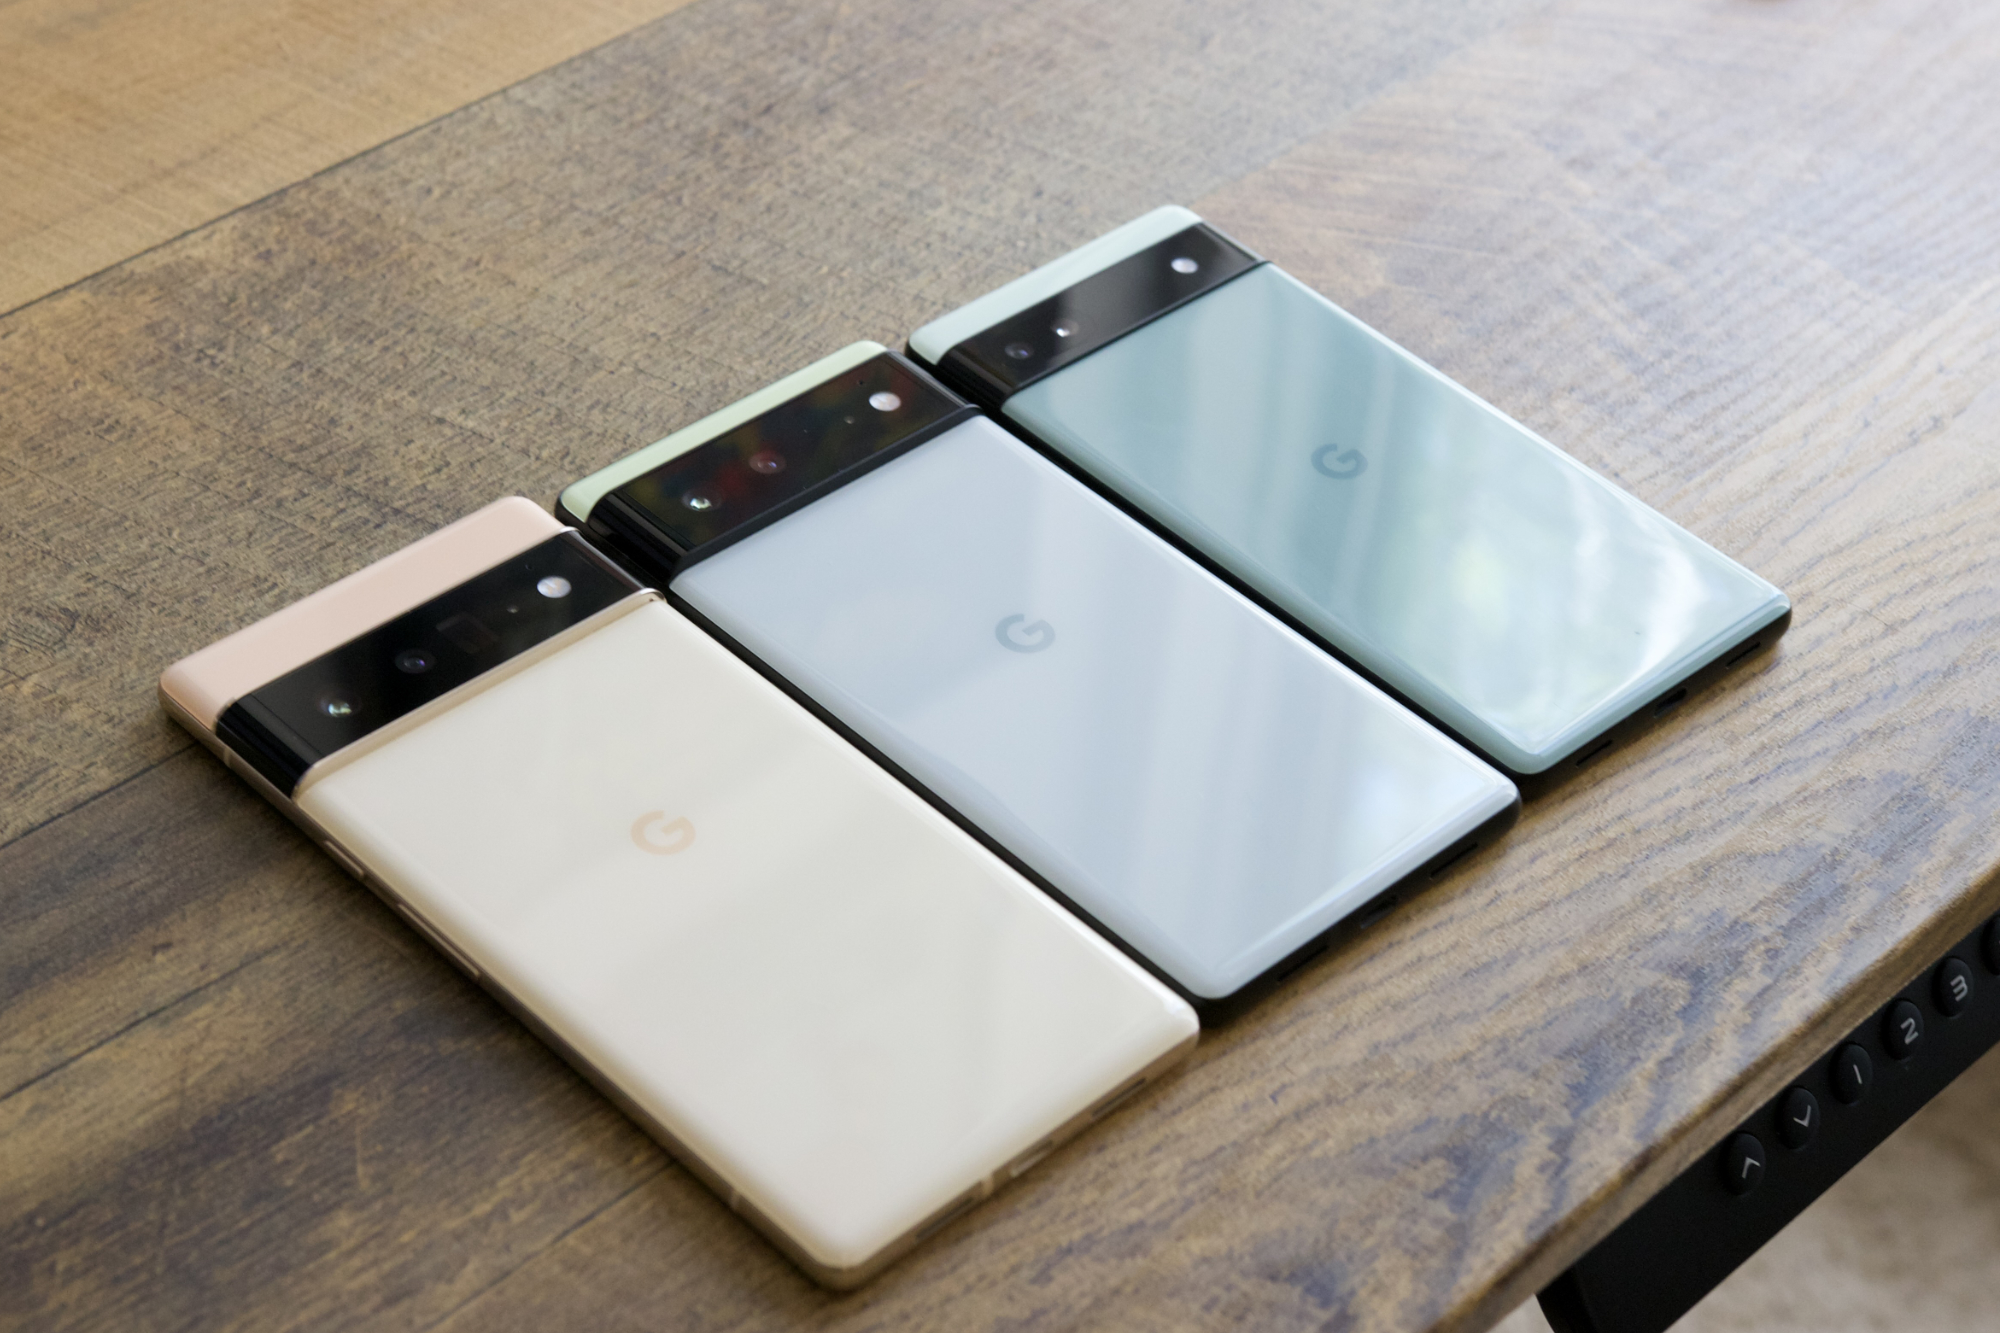 Pixel 6 and 6 Pro review: The 'Google phone' that makes convenience fun